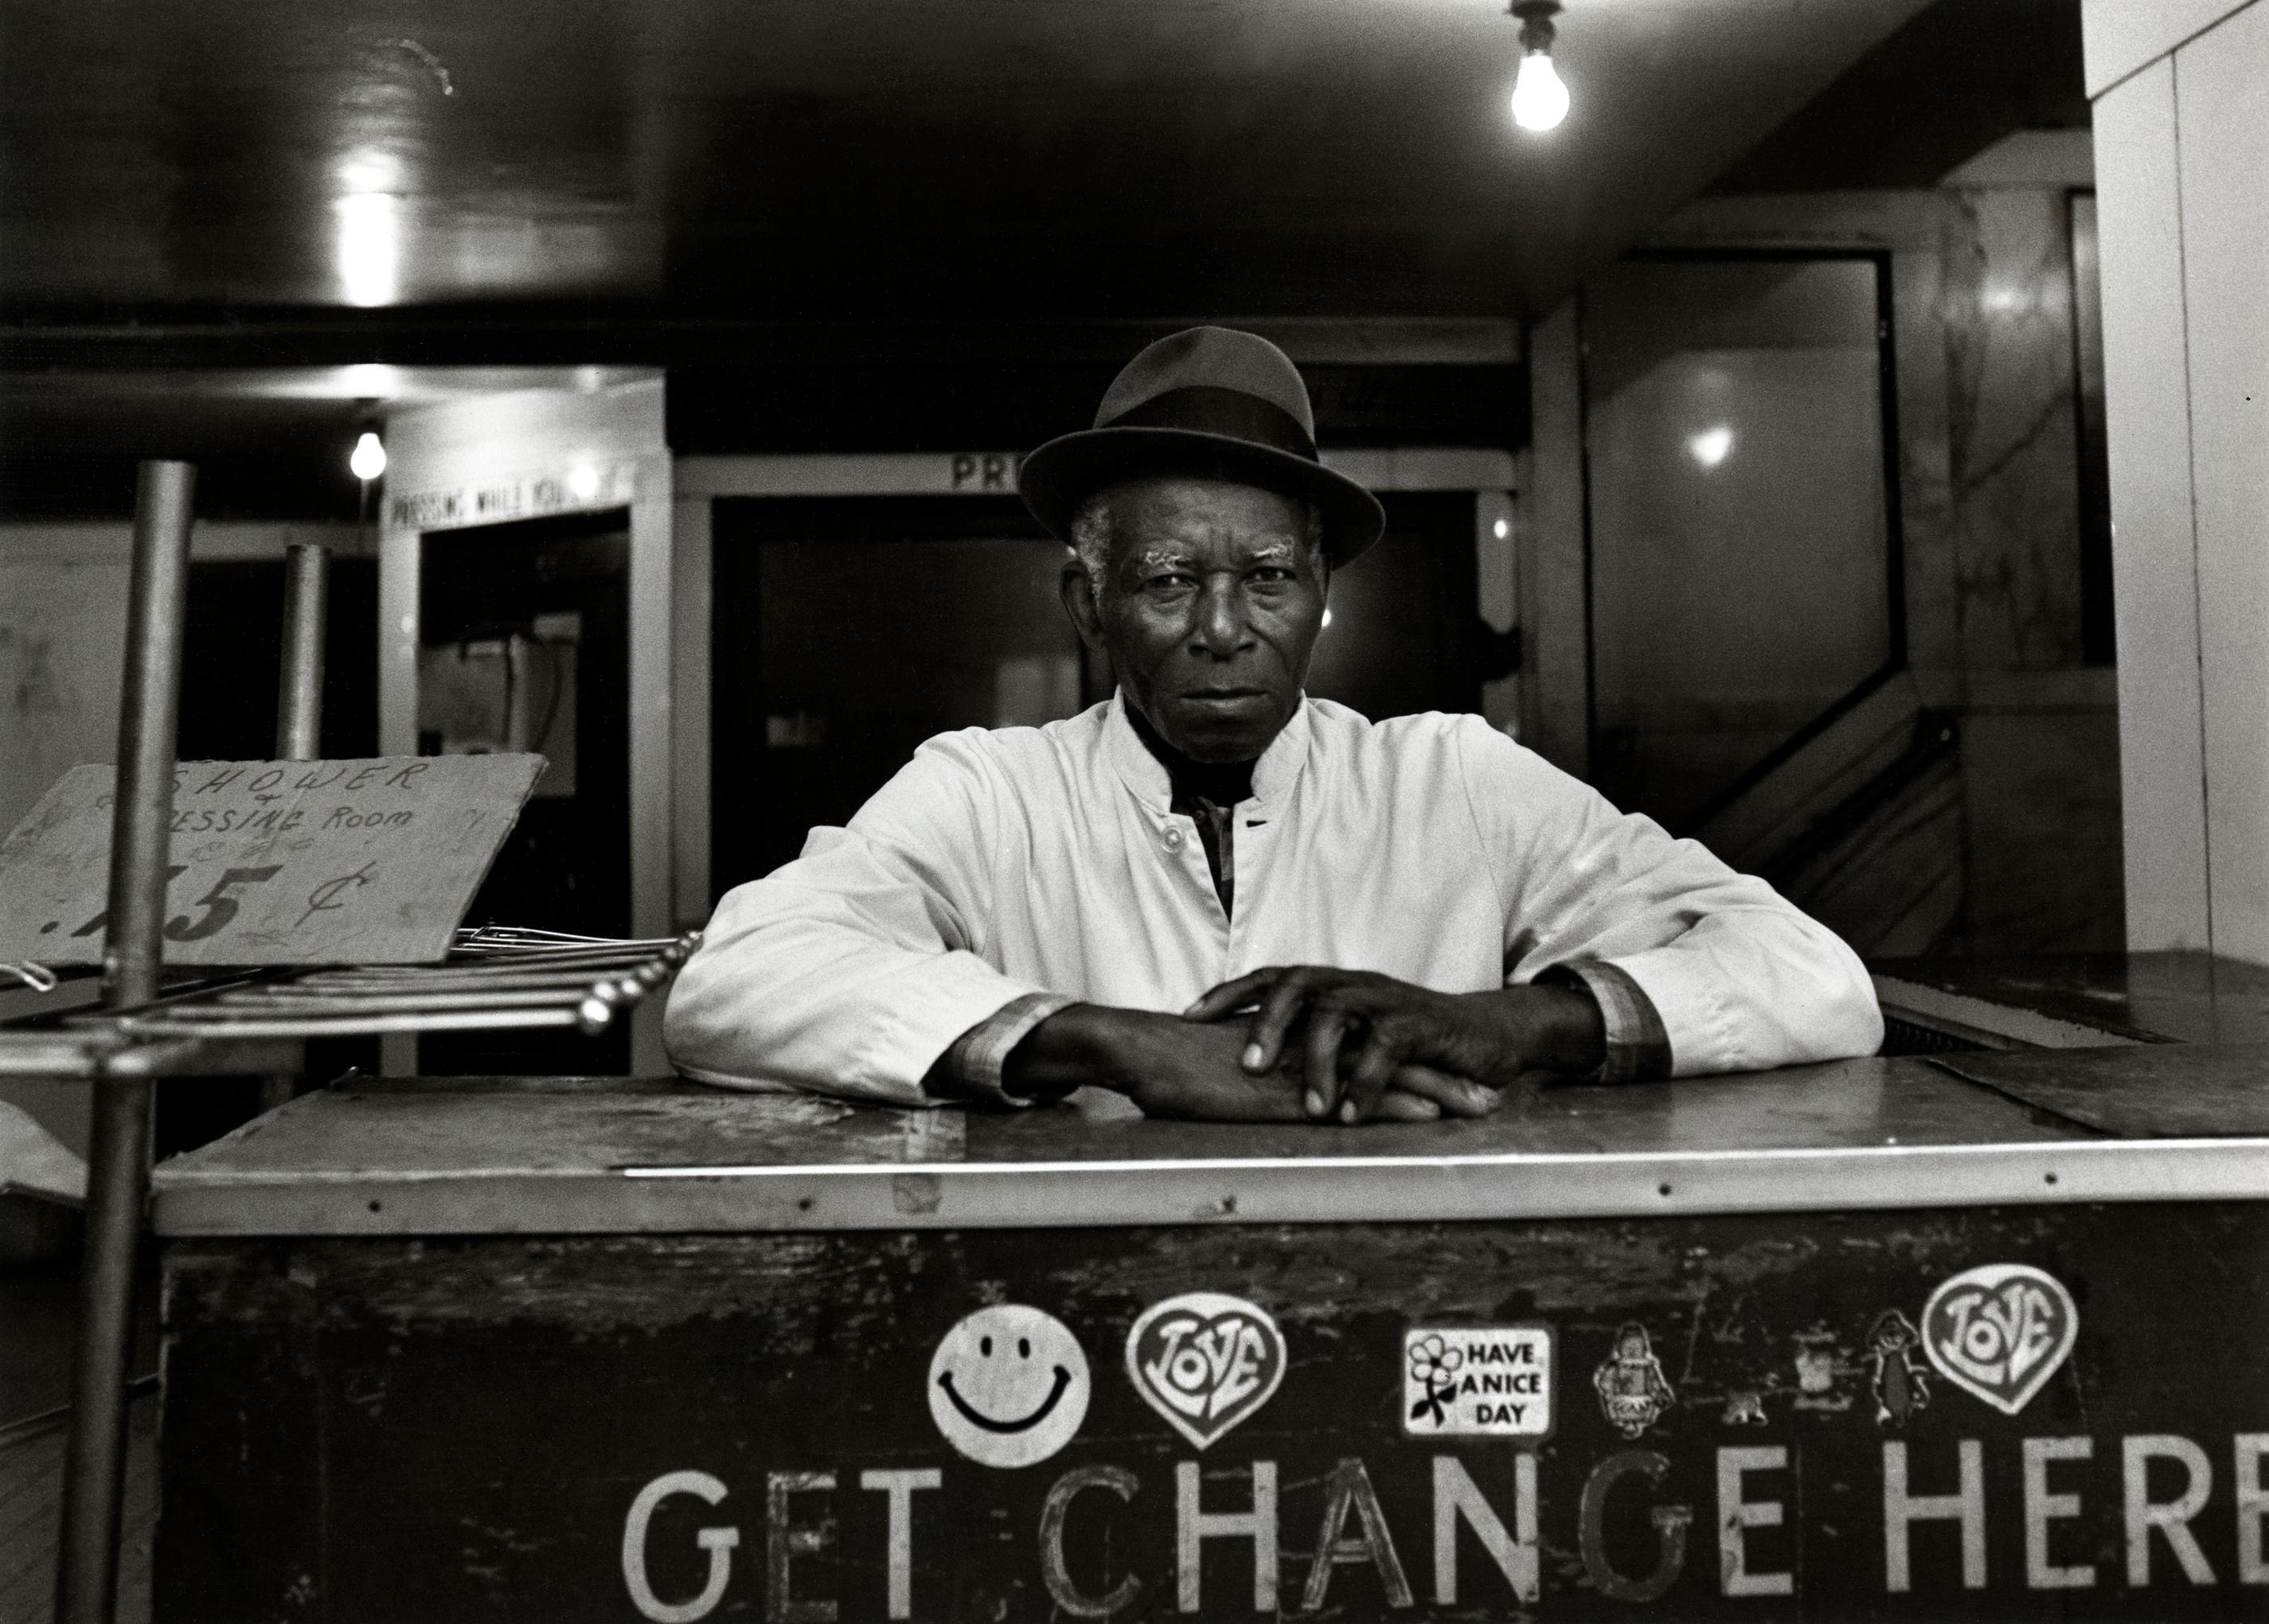 Subway 12, Black & White, Limited Edition Photograph, NYC, 1980, Unframed